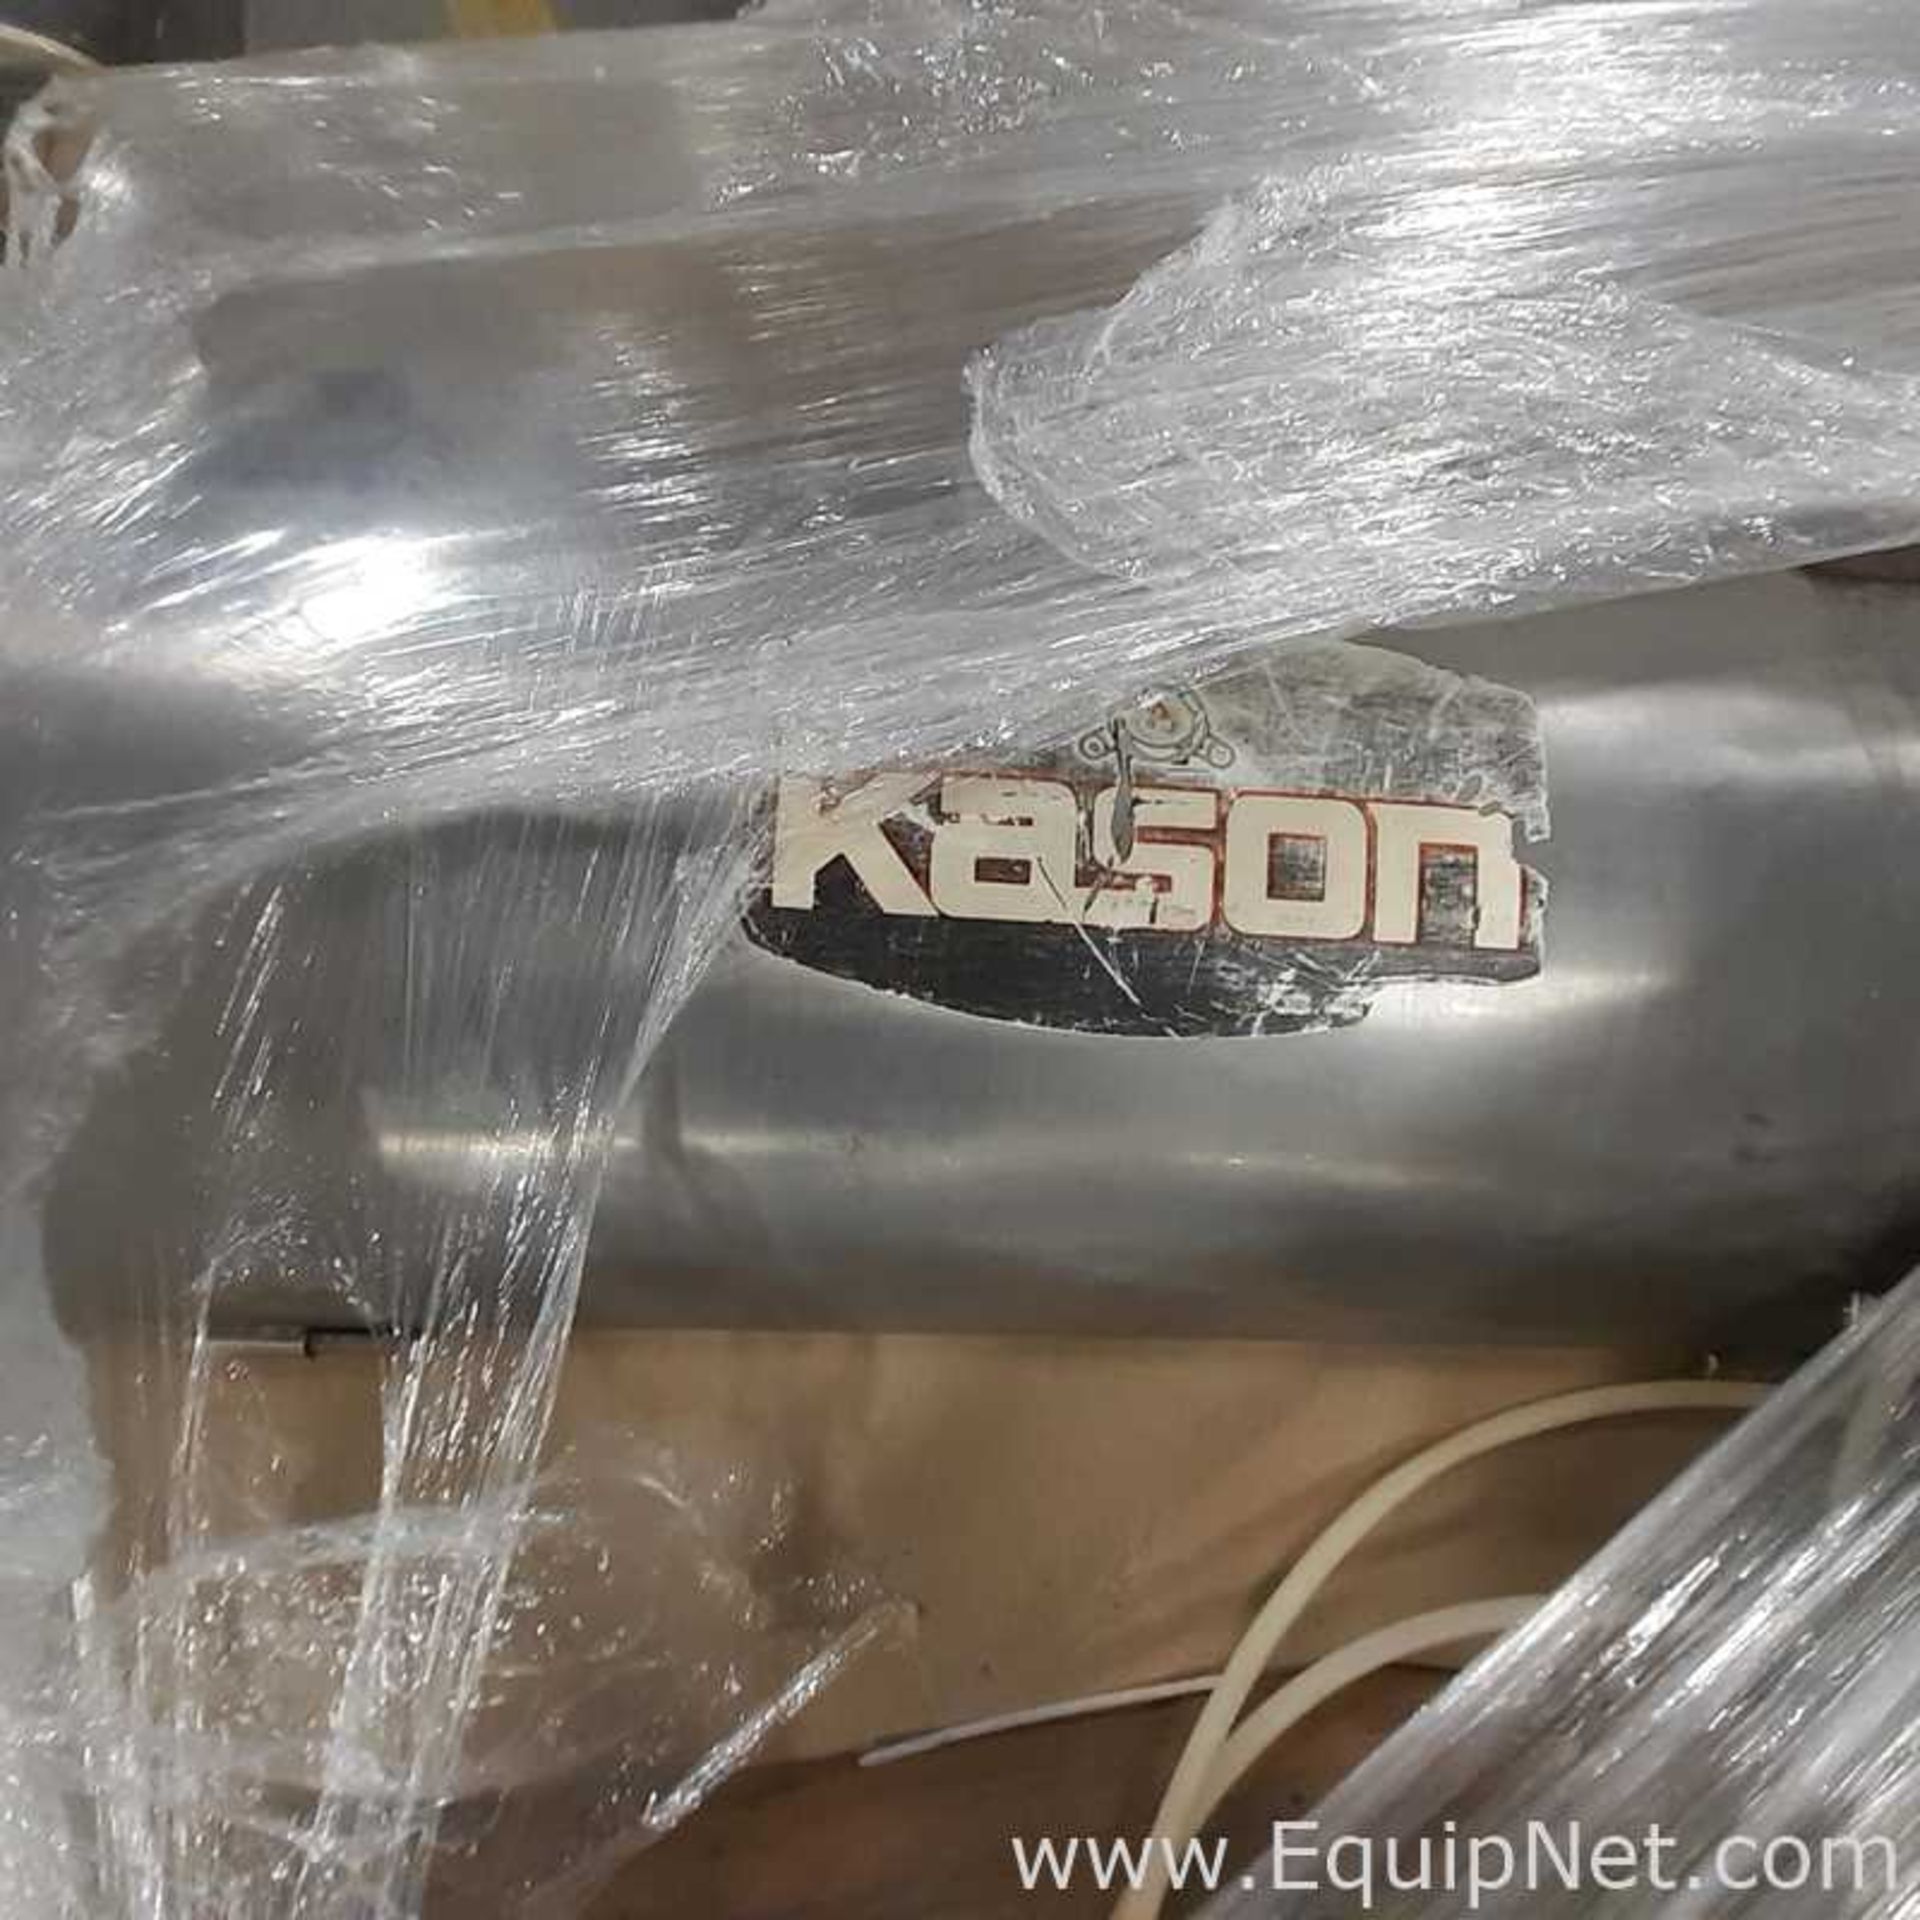 Kason Stainless Steel Centrifugal Sifter - Image 8 of 10